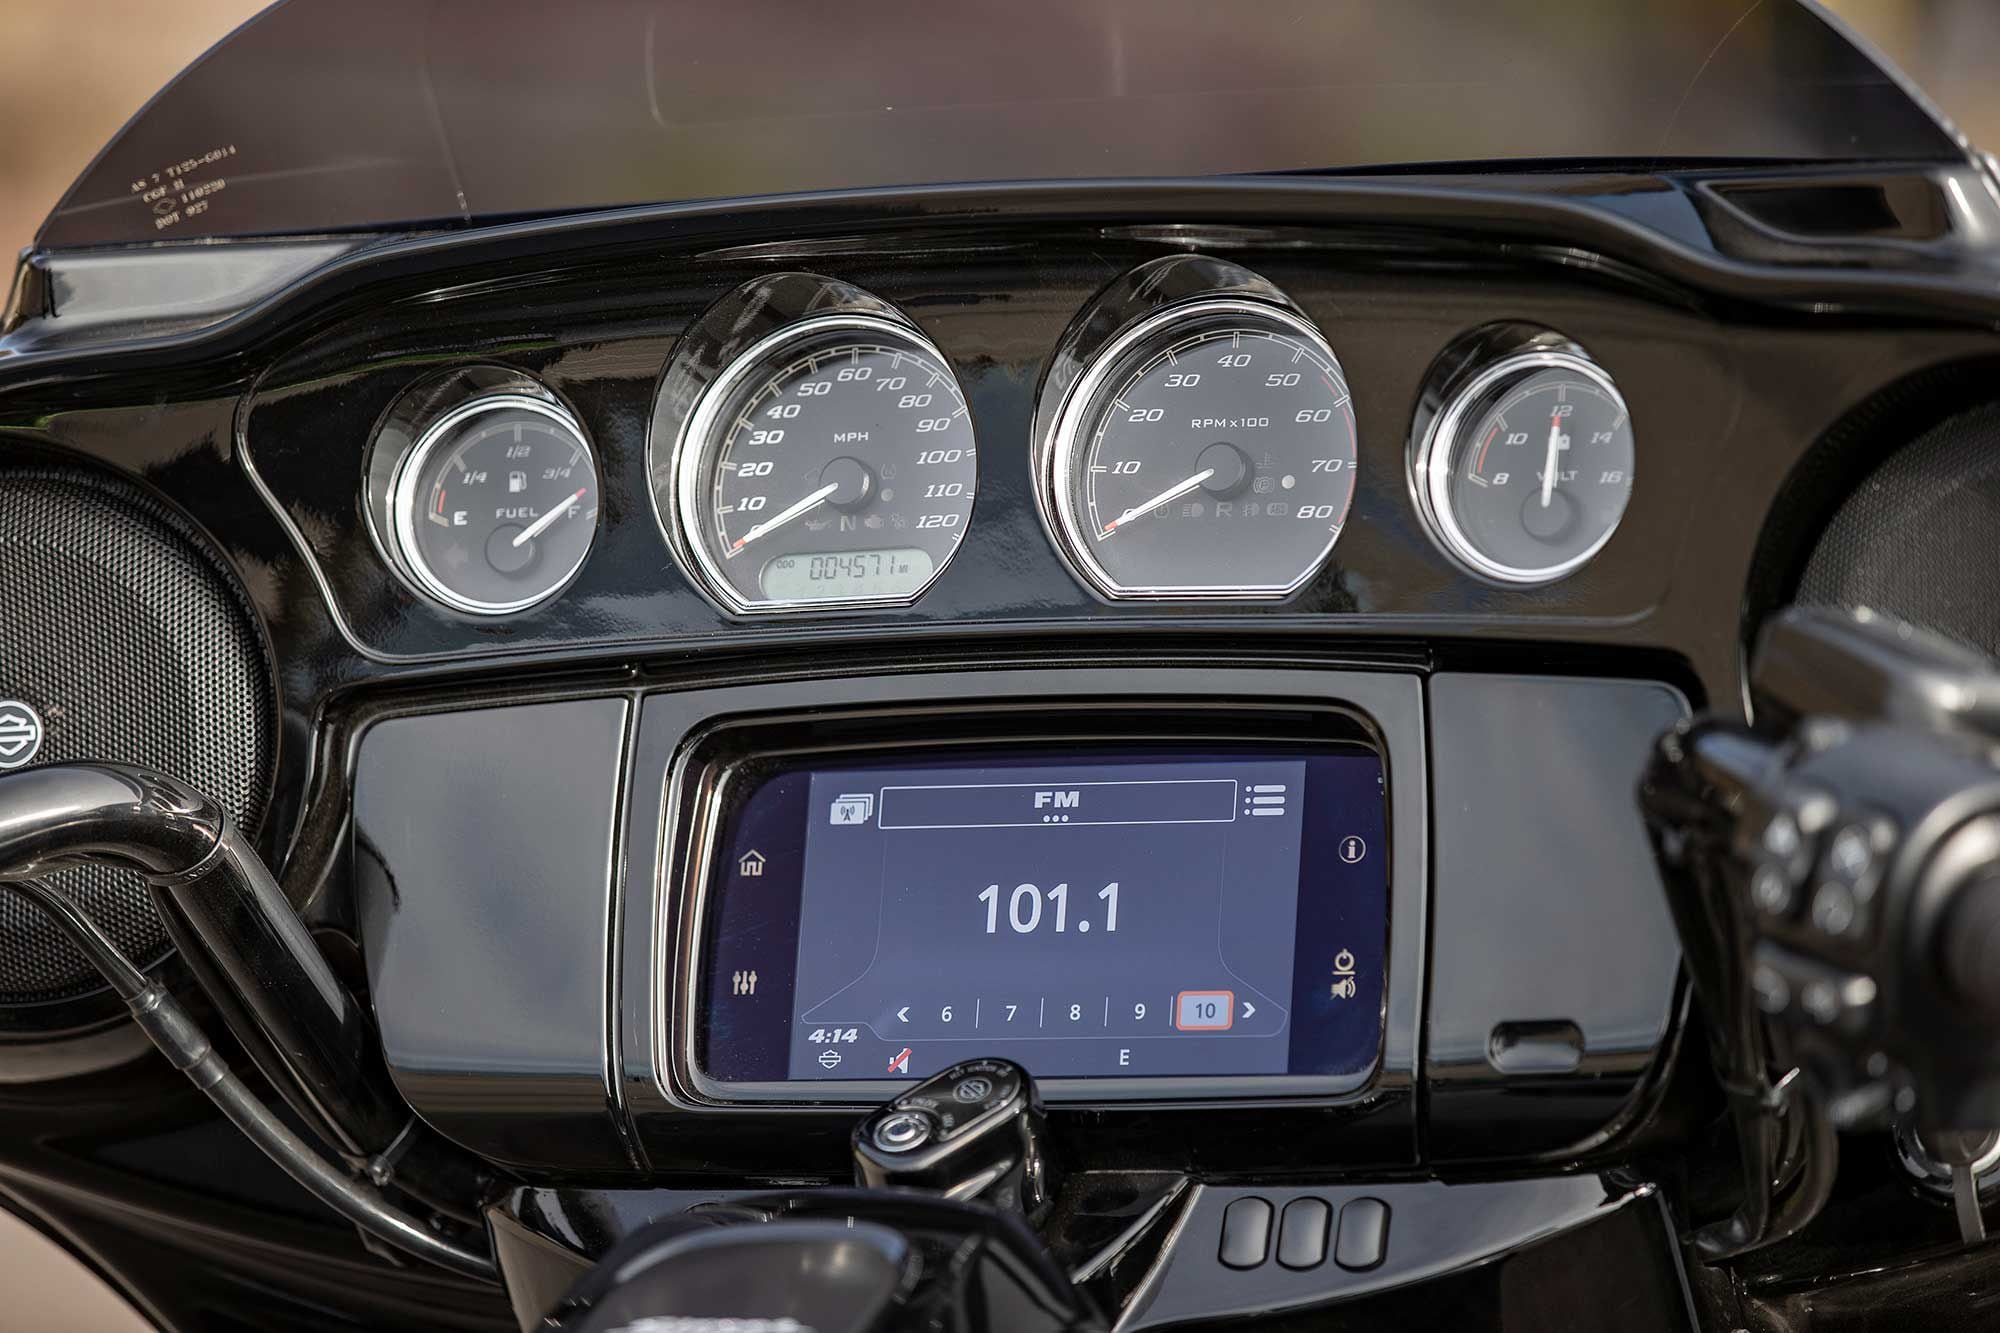 The Street Glide Special’s gauge and infotainment system.